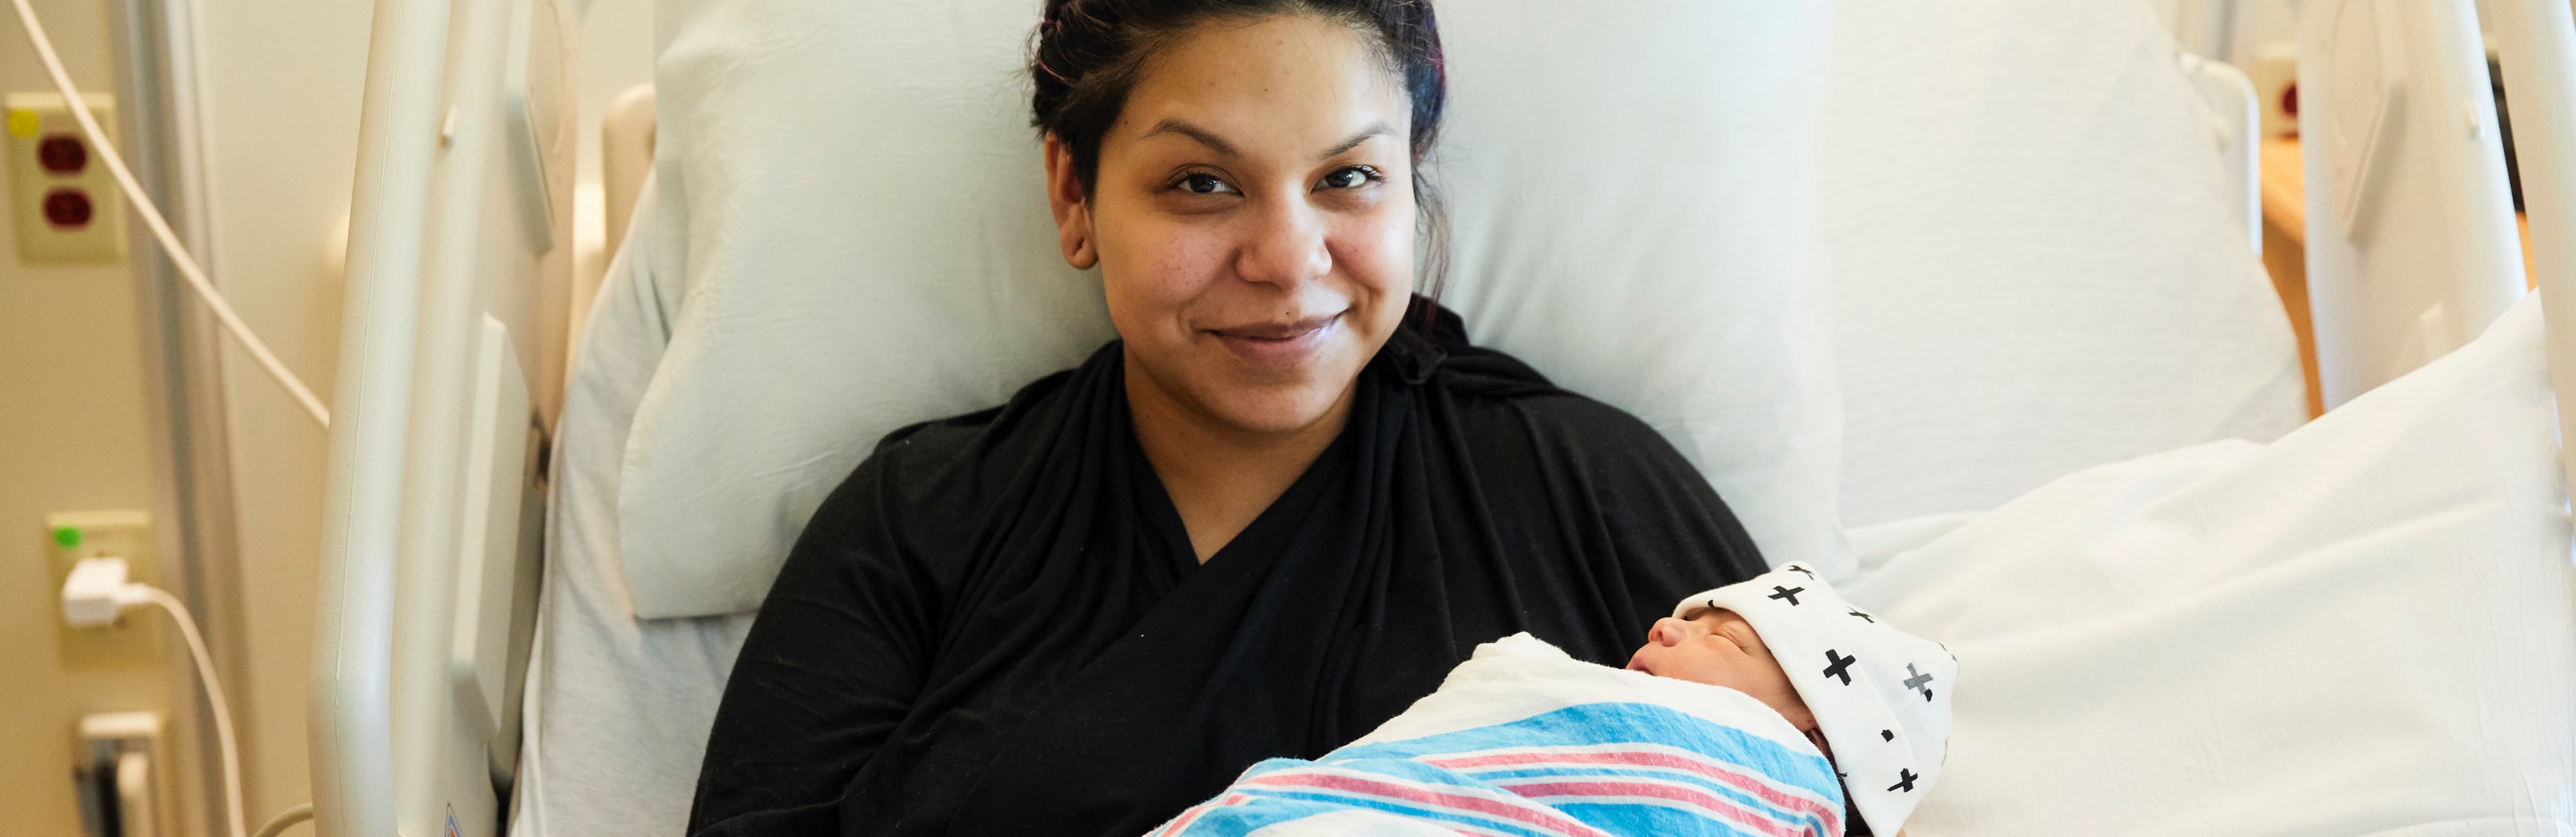 Smiling Latina mom in a hospital bed holding her newborn baby